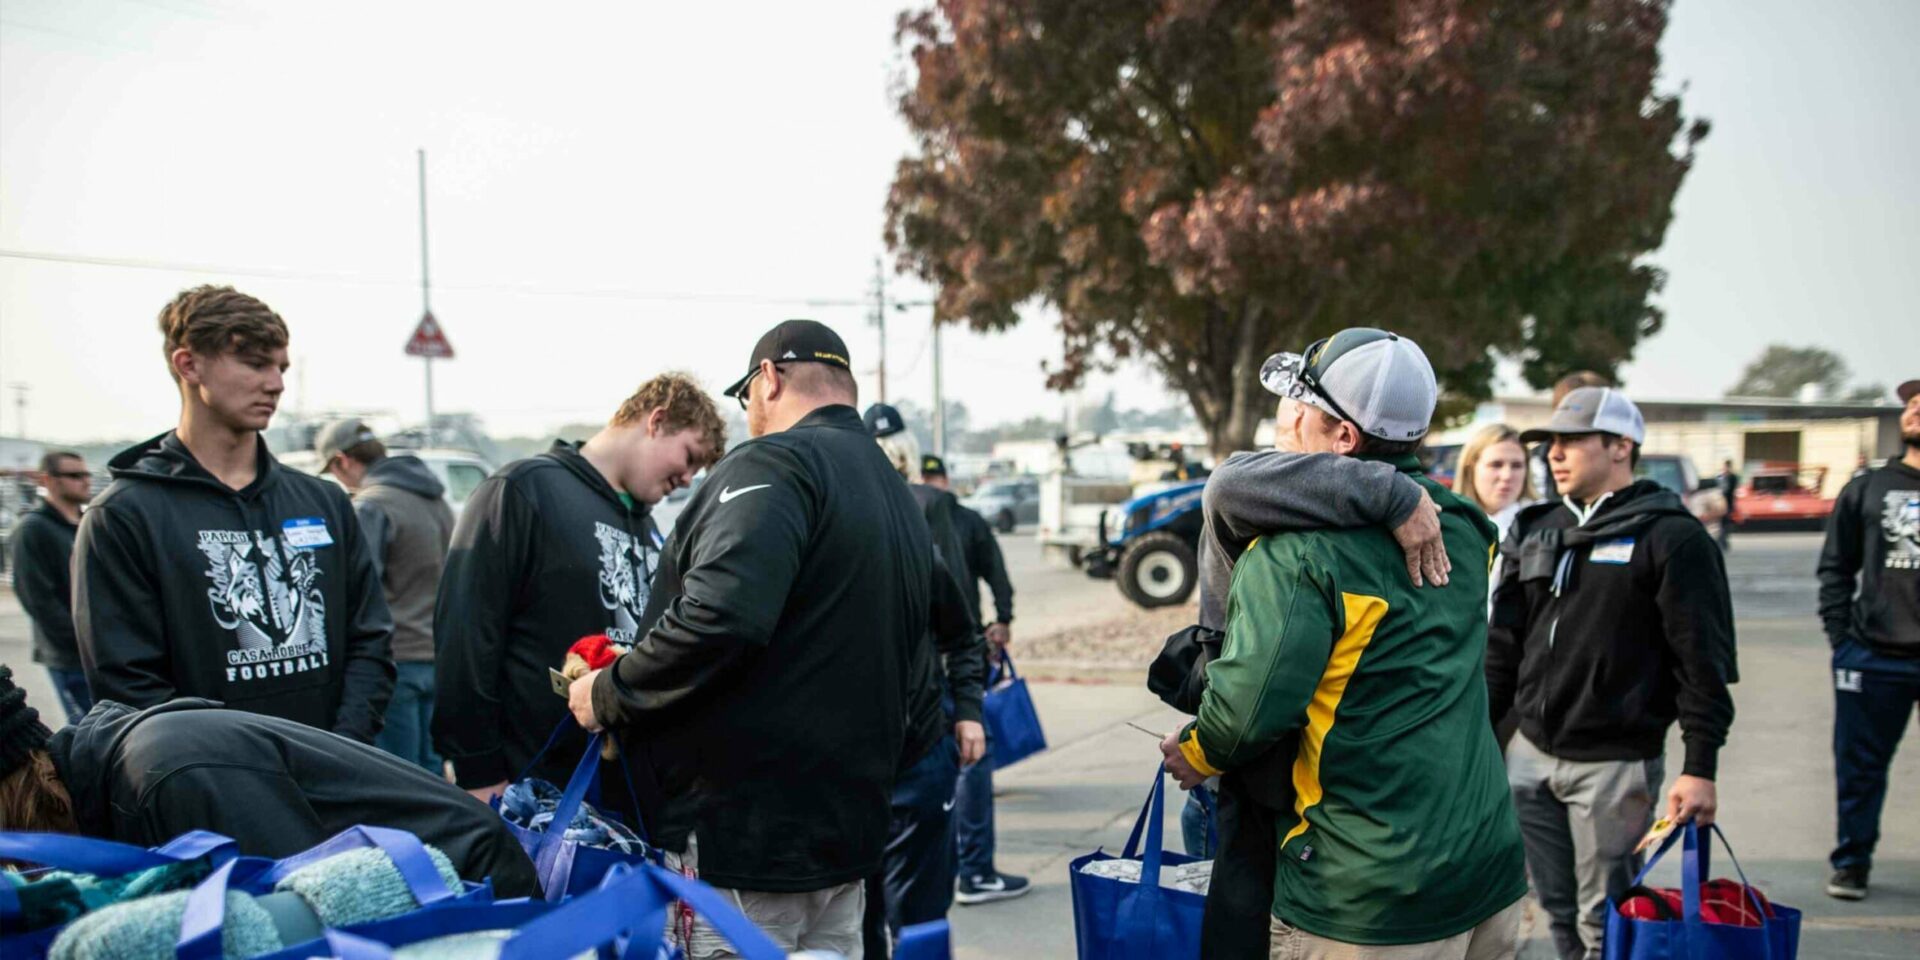 A care package is passed from one student to another. (Photo courtesy of the Casa Roble football team)